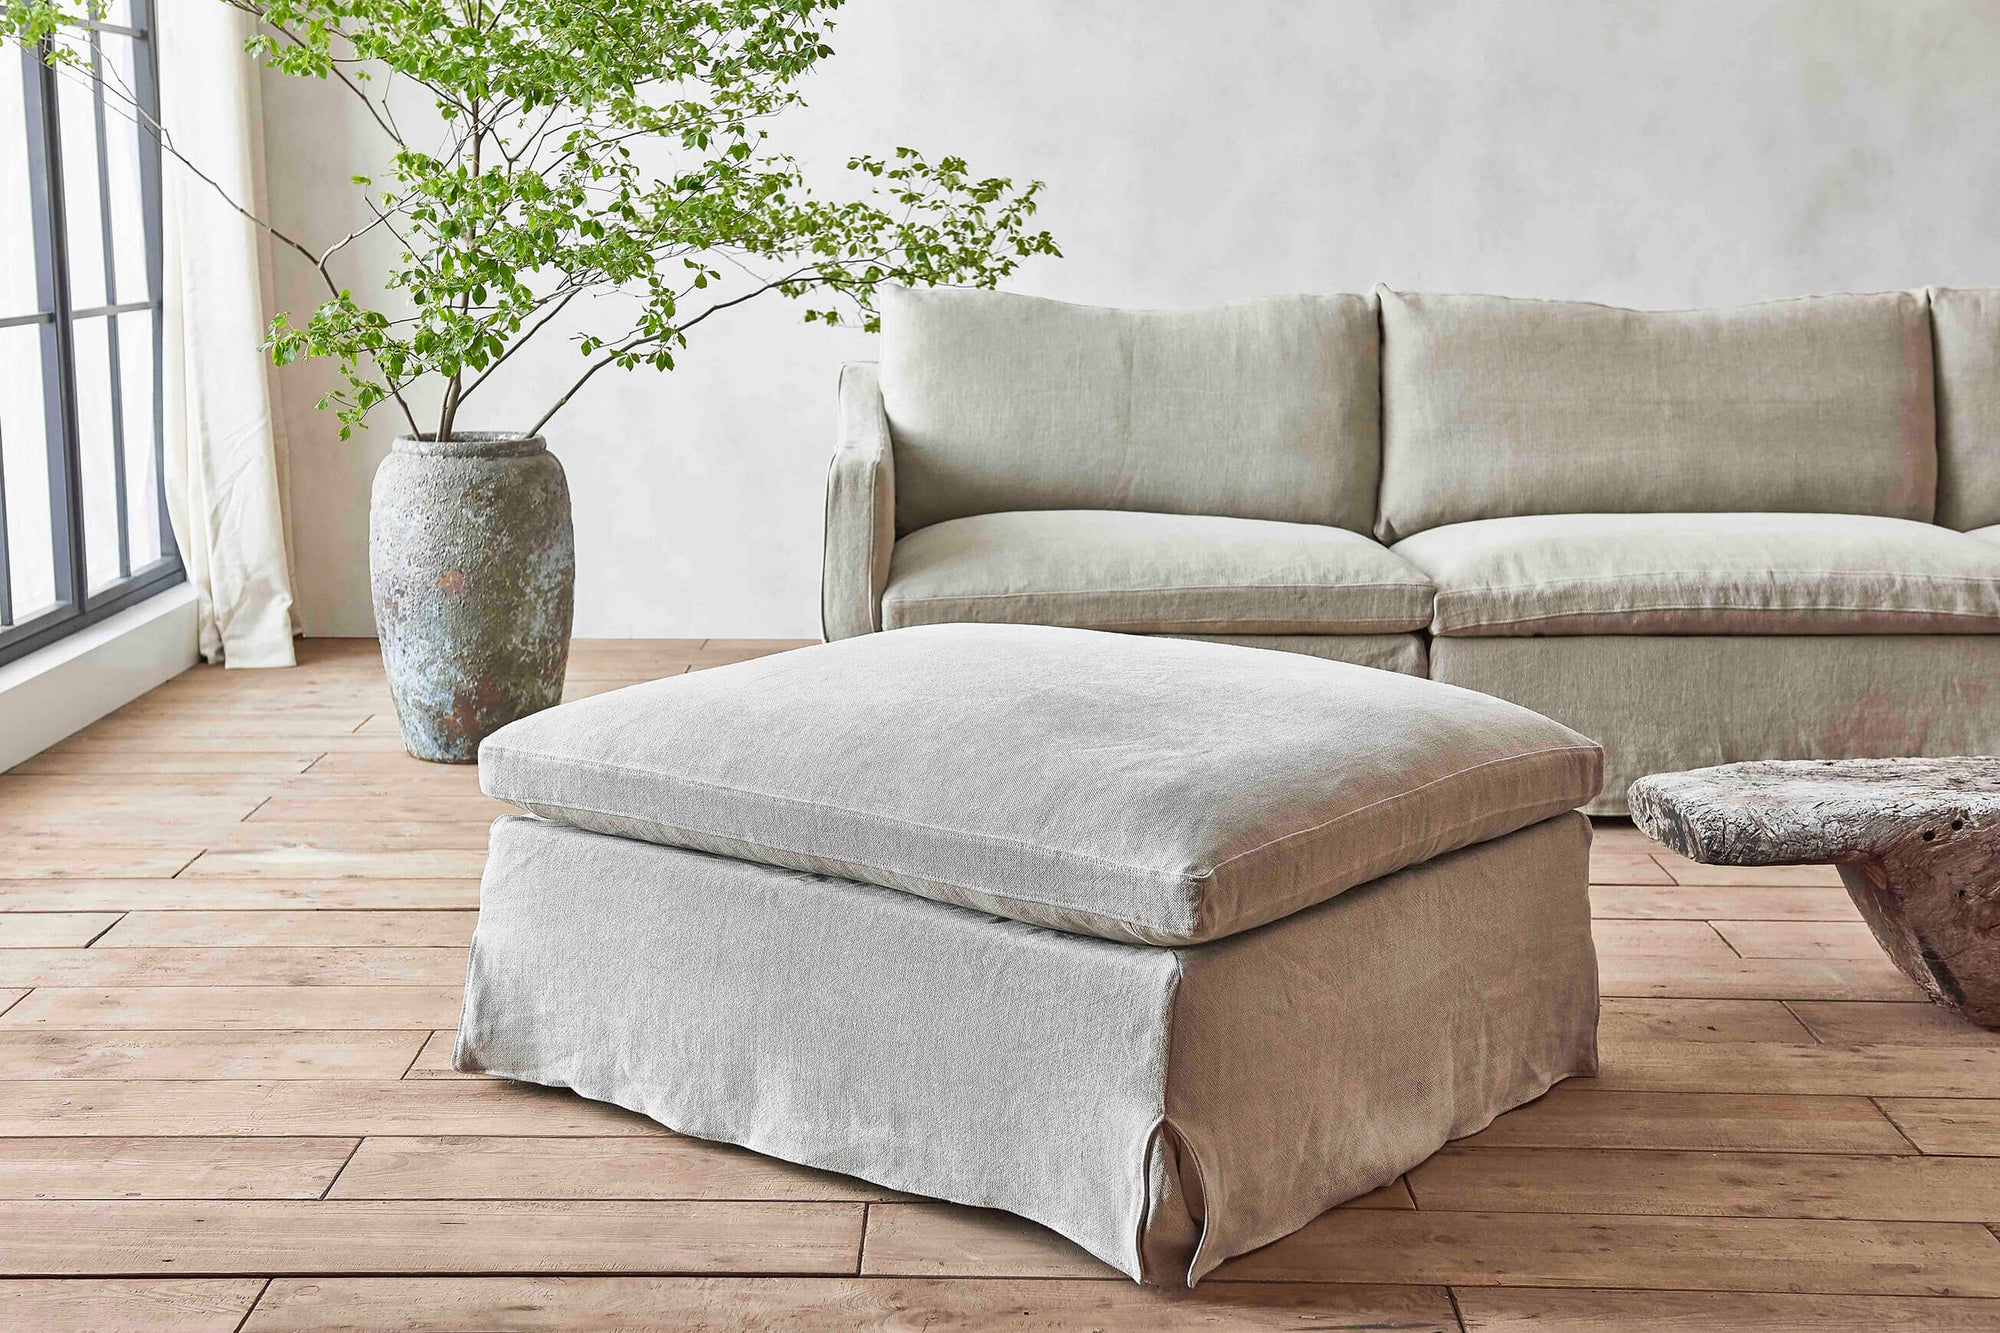 Amelia Sectional Ottoman in Jasmine Rice, a light warm greige Medium Weight Linen, placed in a room with the Amelia Sectional Sofa